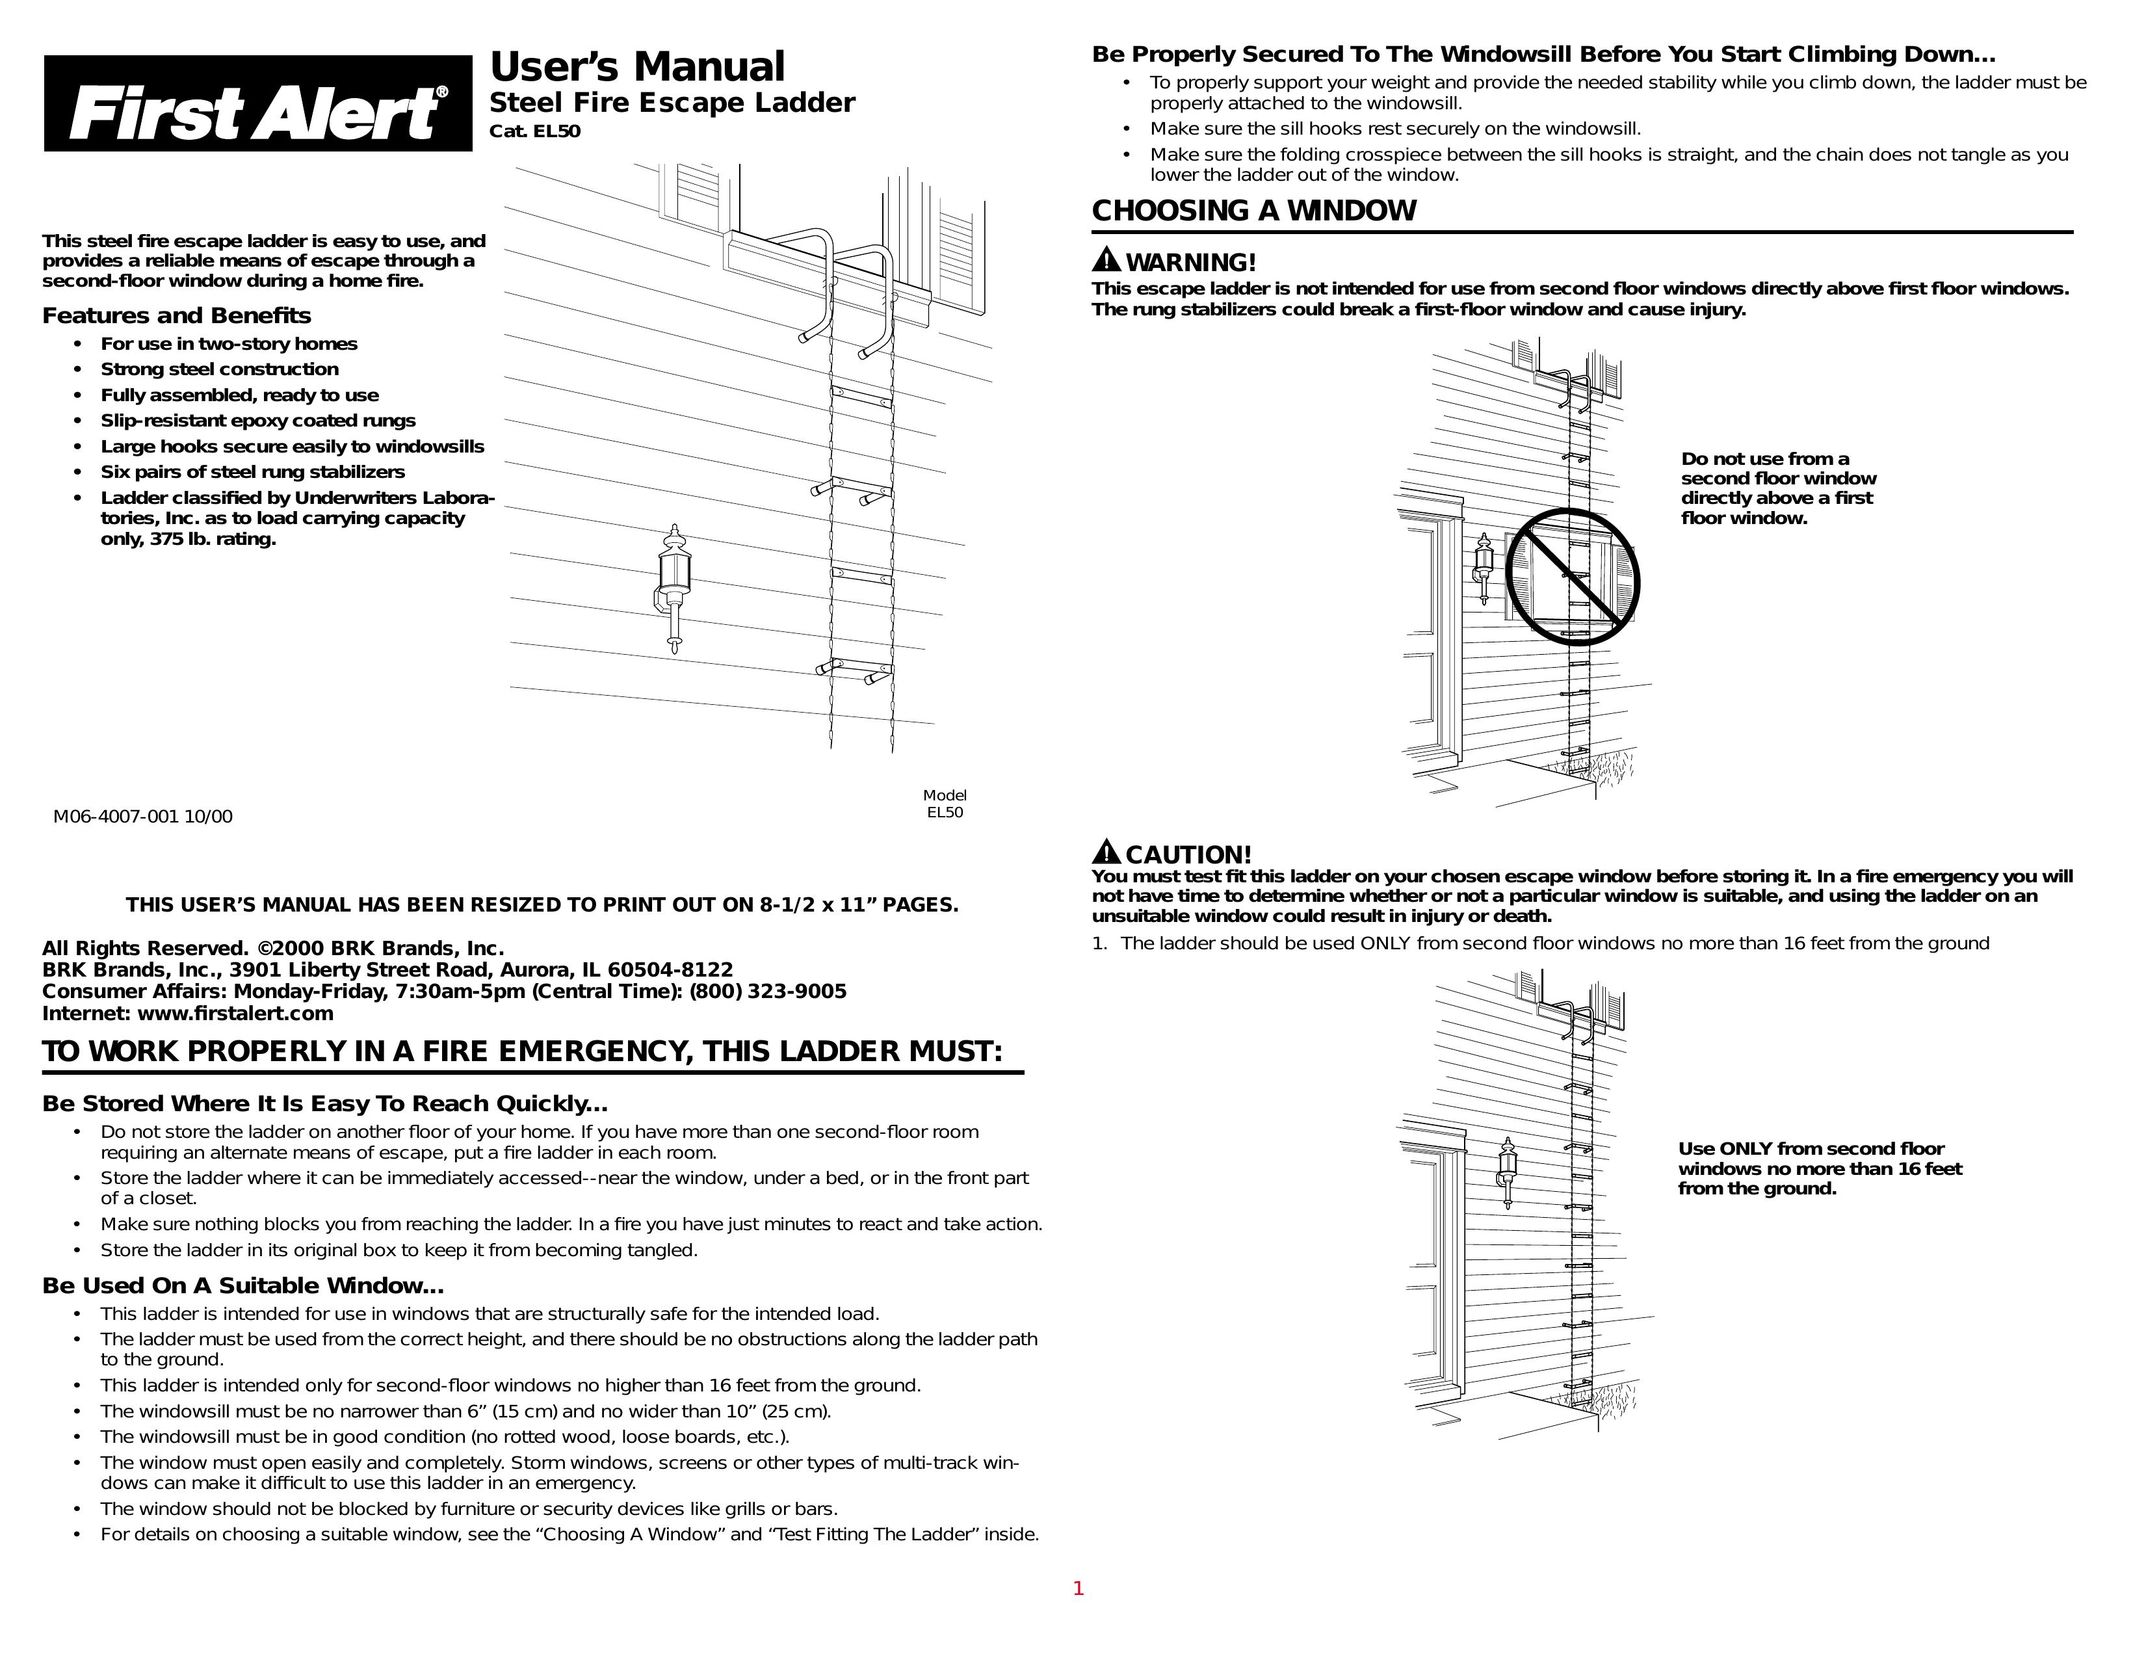 BRK electronic EL50 Home Safety Product User Manual